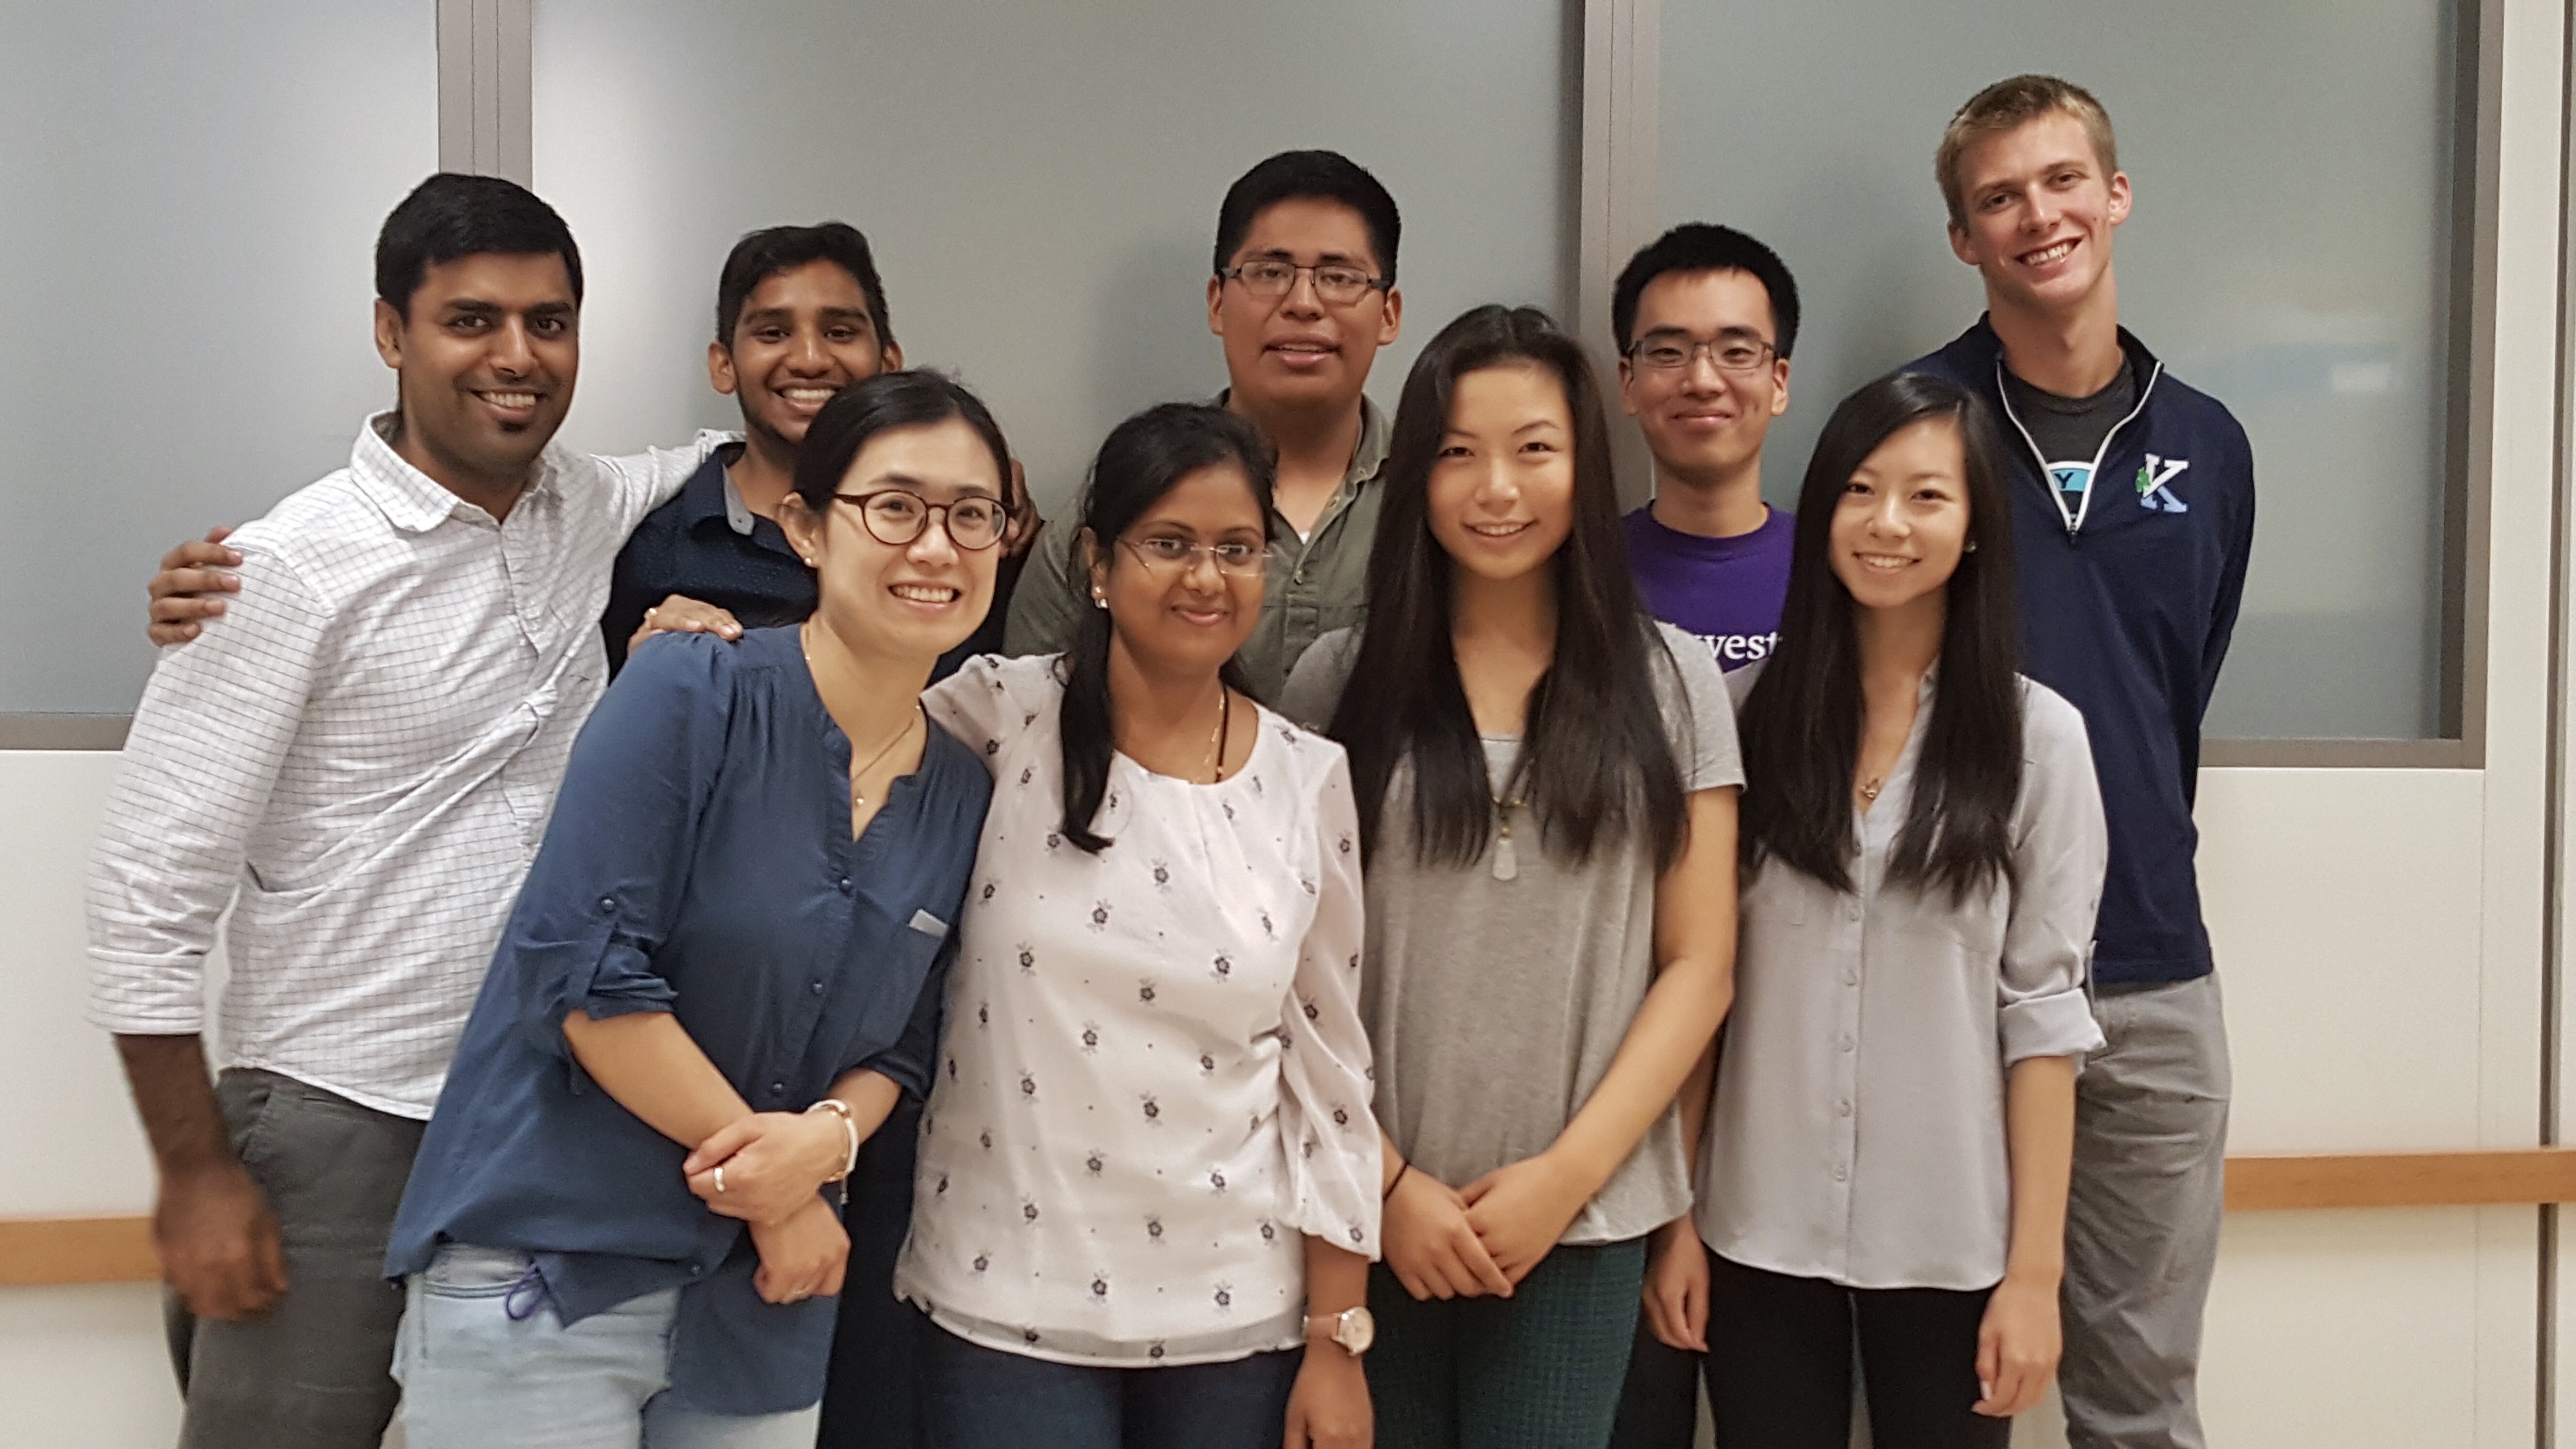 Tiffany Zheng (front row, second from right) is pictured with the soft materials subgroup.